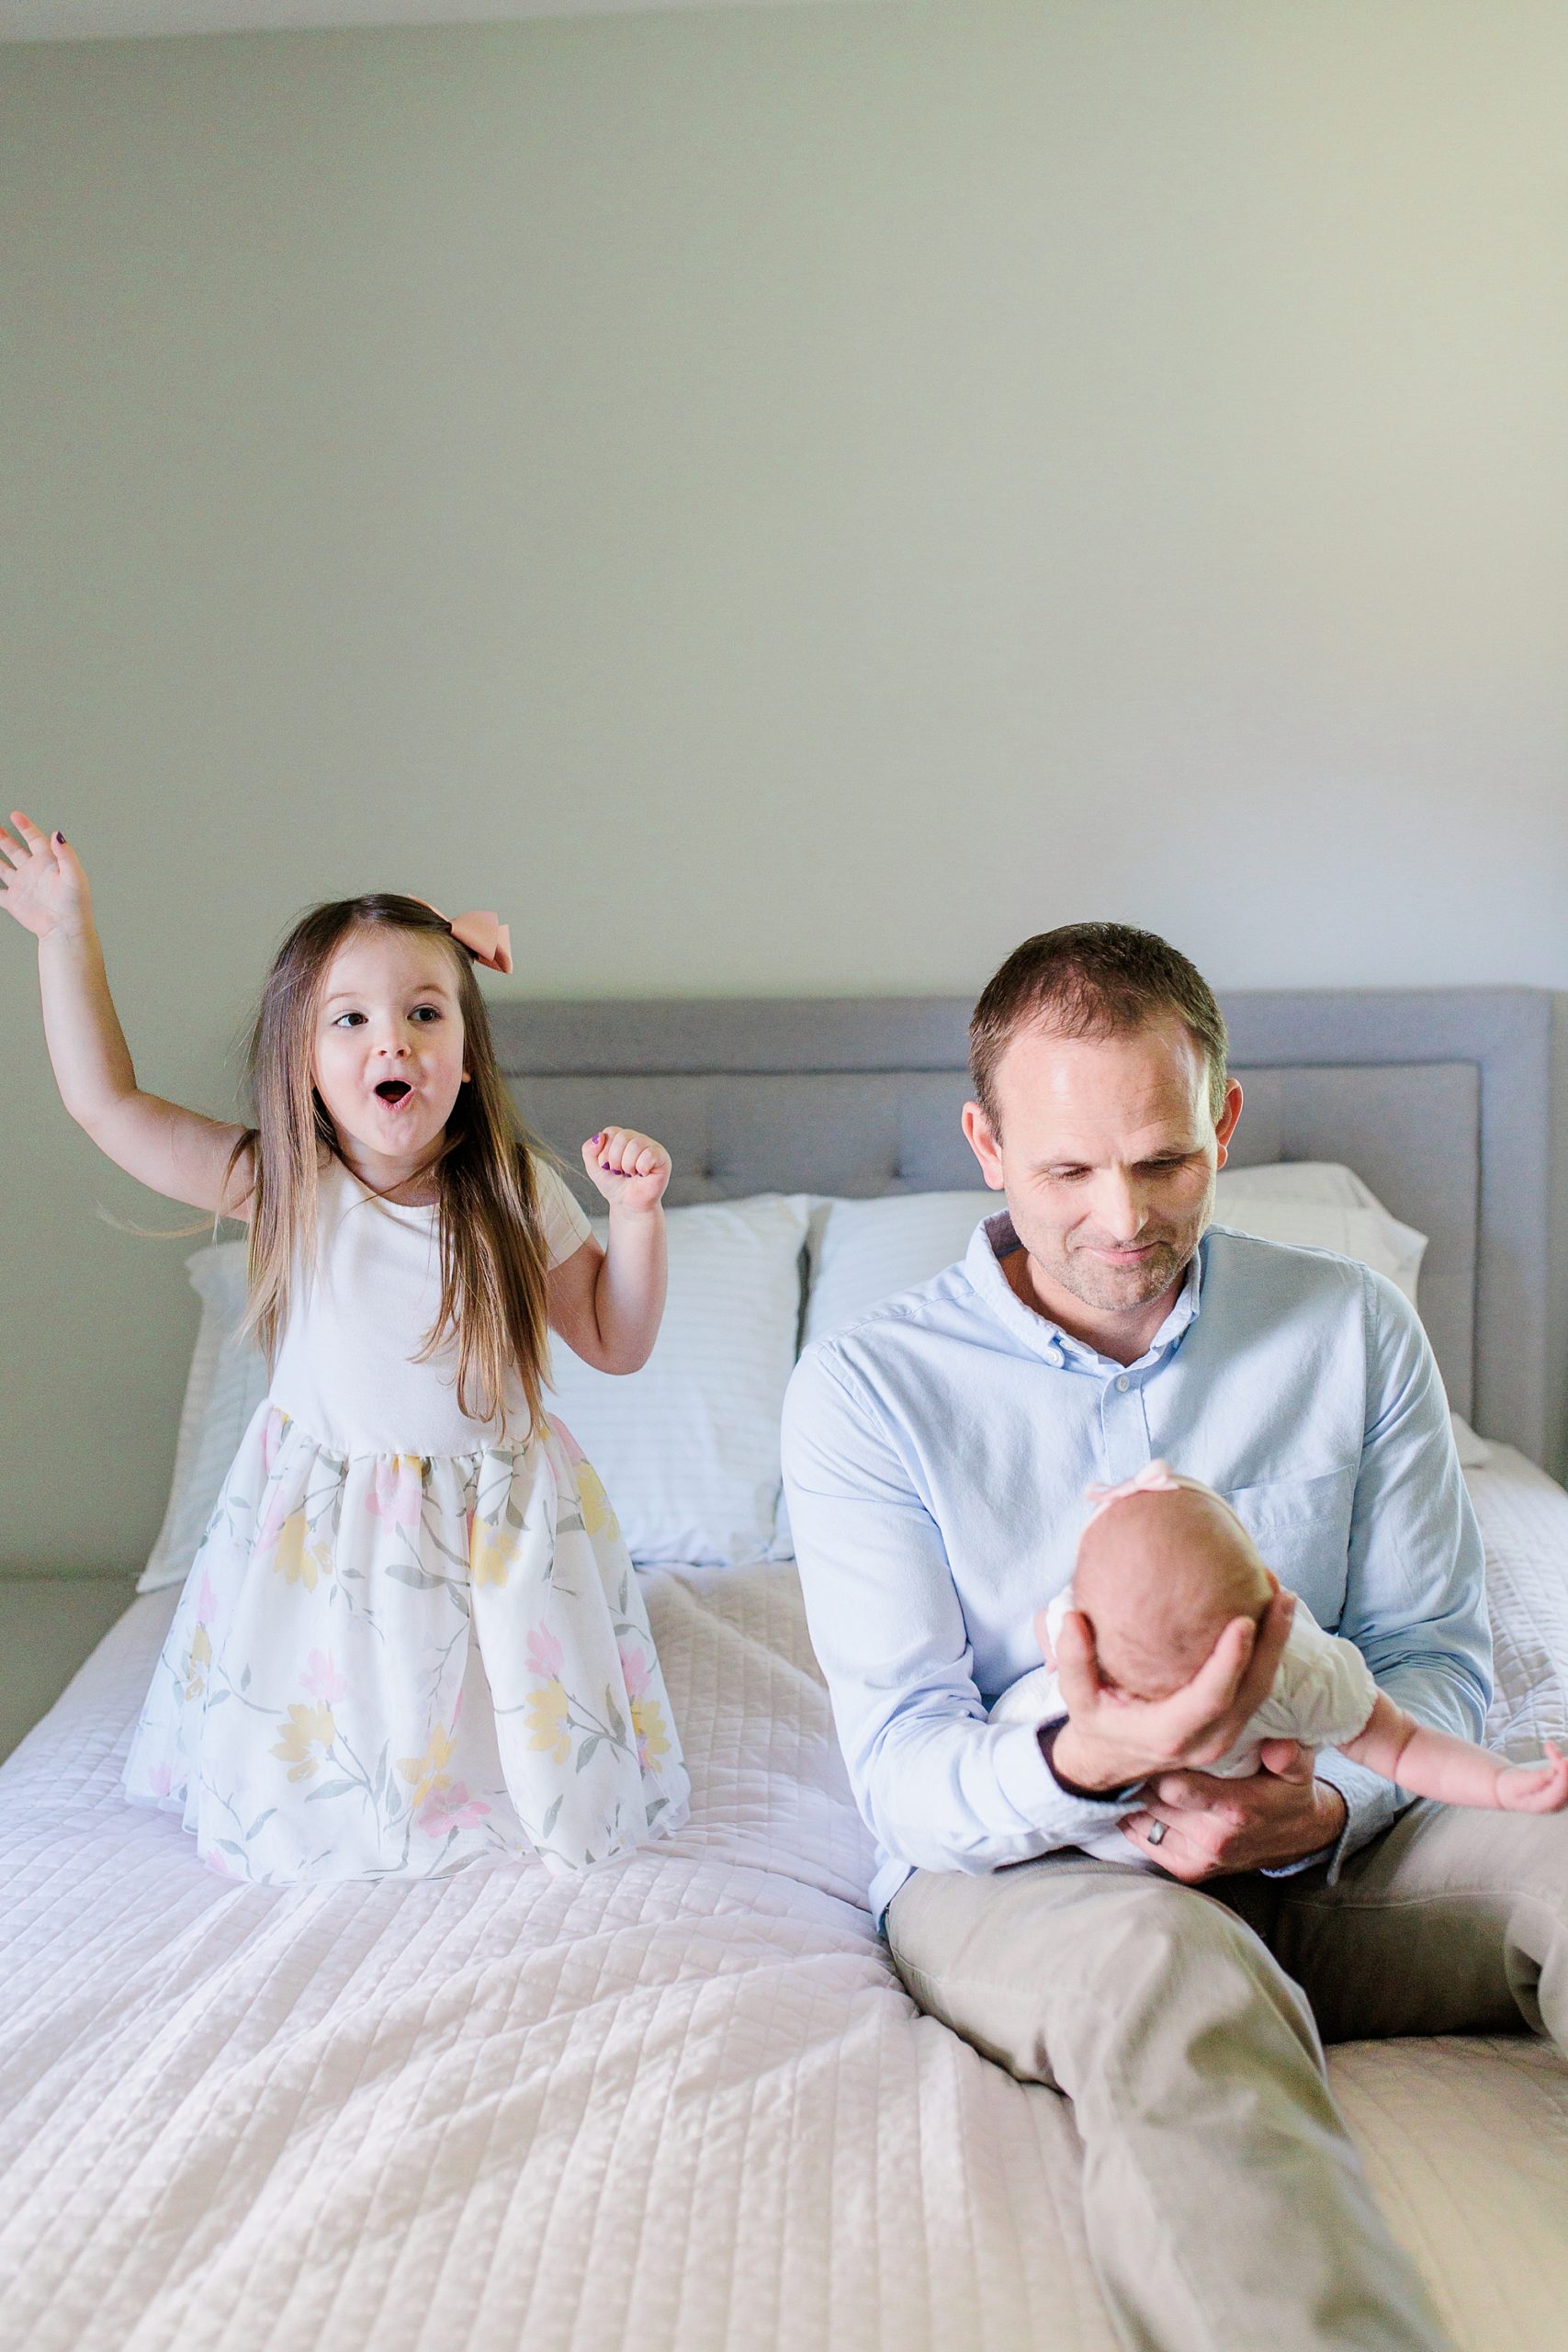 dad holds baby while big sister jumps on bed next to them